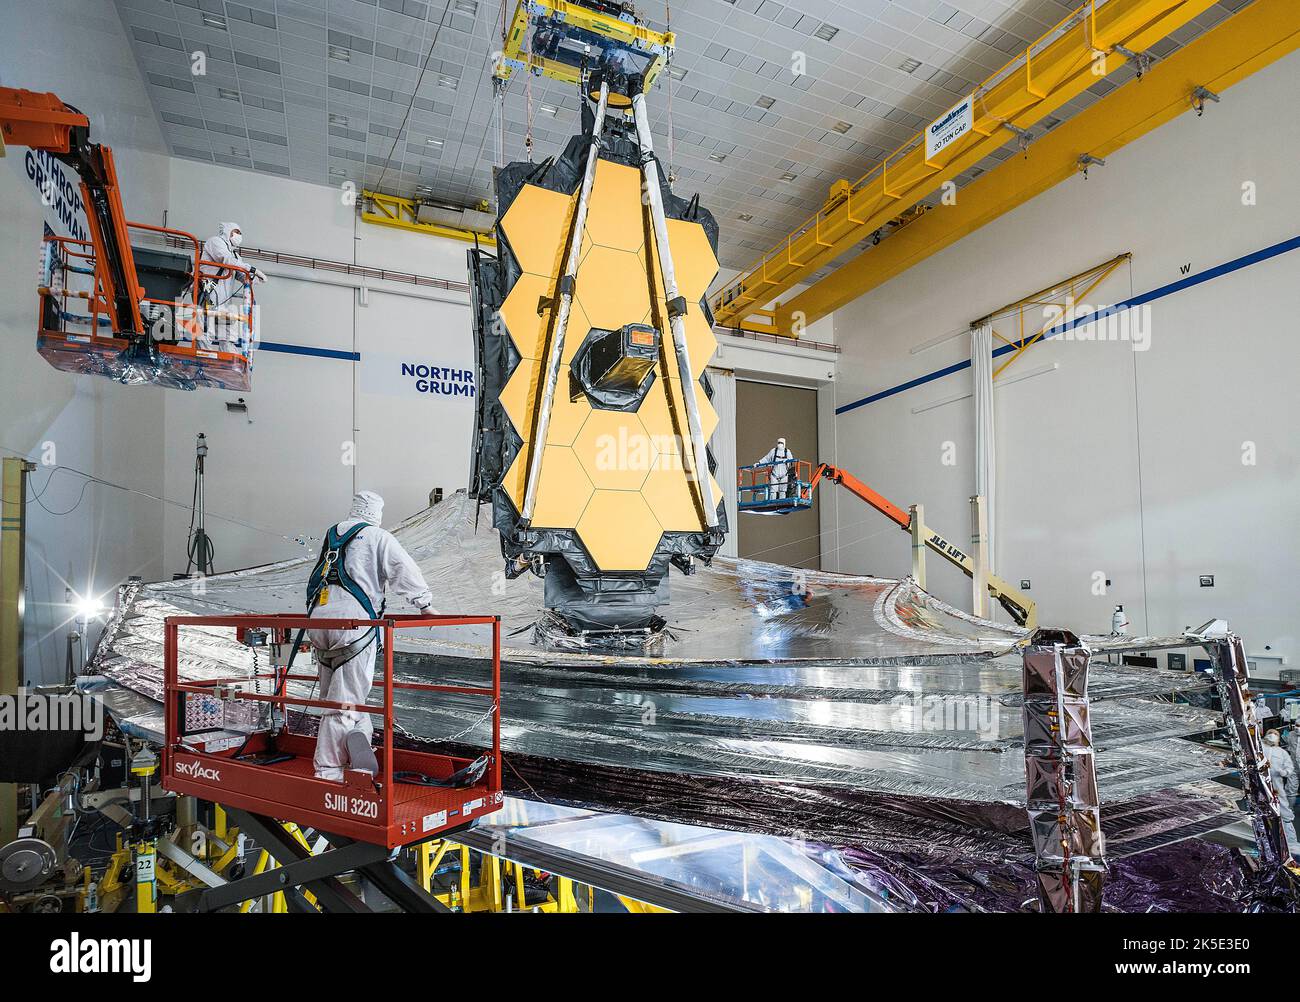 Preparing the James Webb Space Telescope (JWST). Webb's 5-layer sunshield has successfully tested - deployed and tensioned into the same configuration it will be when operating in space. Here the JWST can be seen in its final series of deployment and checkout tests, before the observatory is packed for shipment to French Guiana for launch aboard an ArianeGroup Ariane V rocket. These tests will verify that Webb will deploy perfectly in space after its launch.  An optimised version of a NASA image by experienced lead photographer Chris Gunn. Credit: NASA/Chris Gunn. For editorial use only. Stock Photo